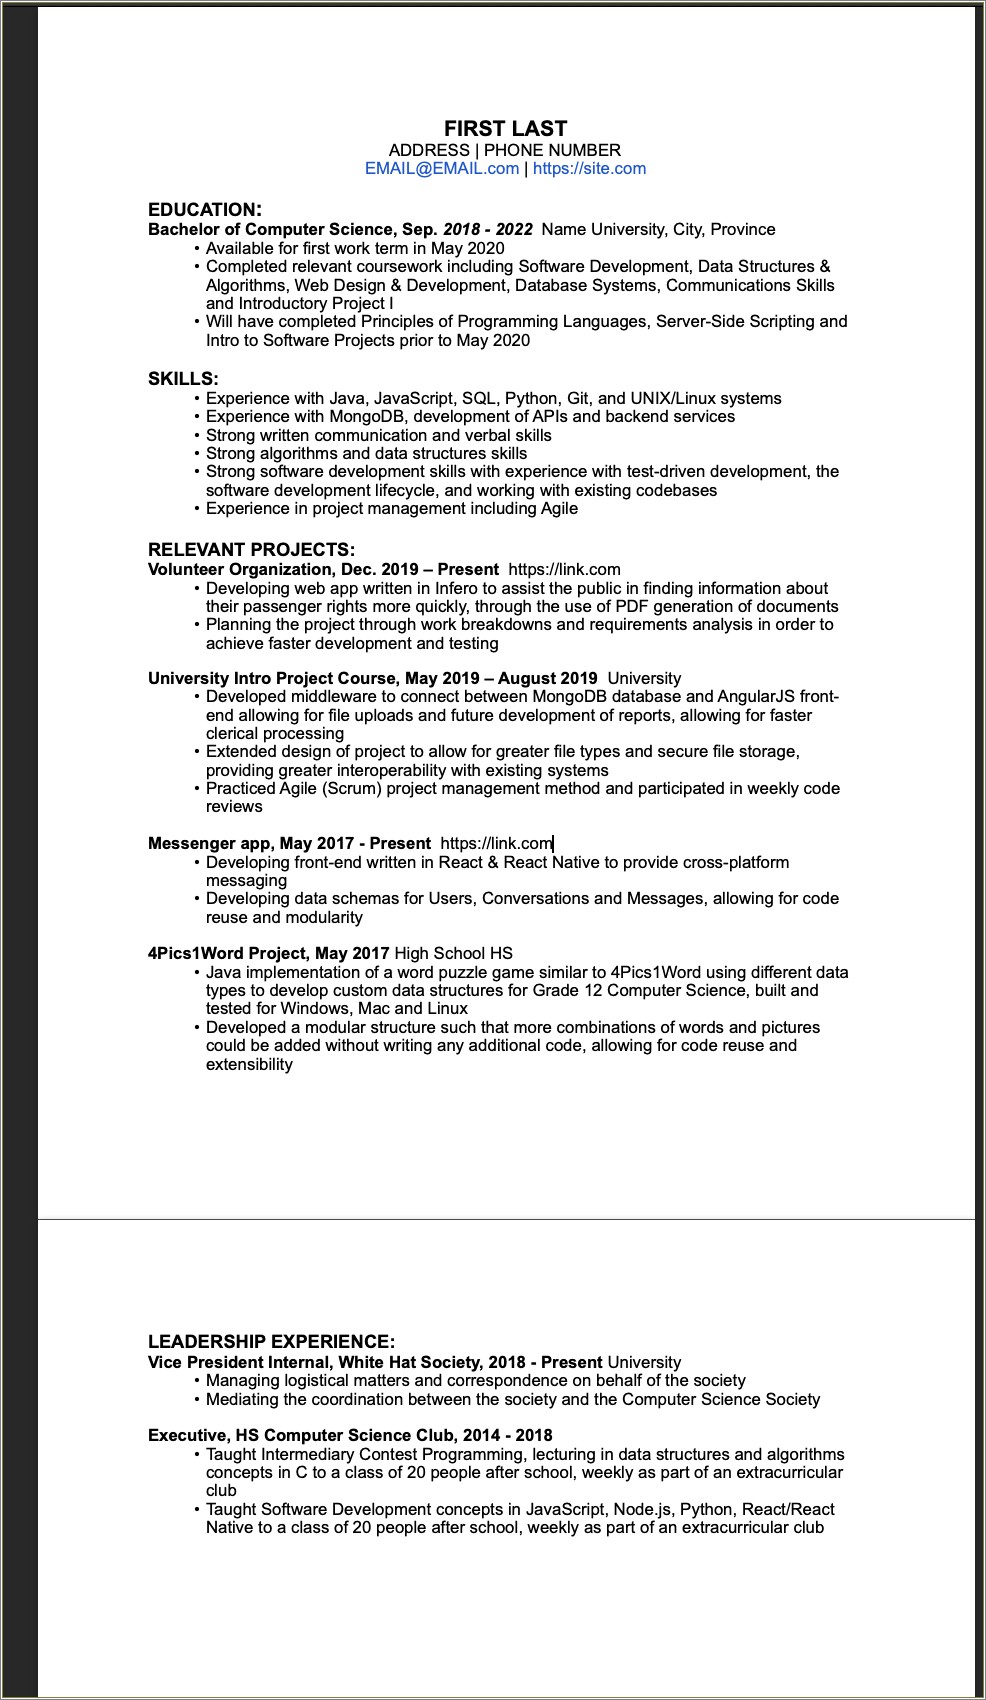 Computer Science Resume Education Or Experience First